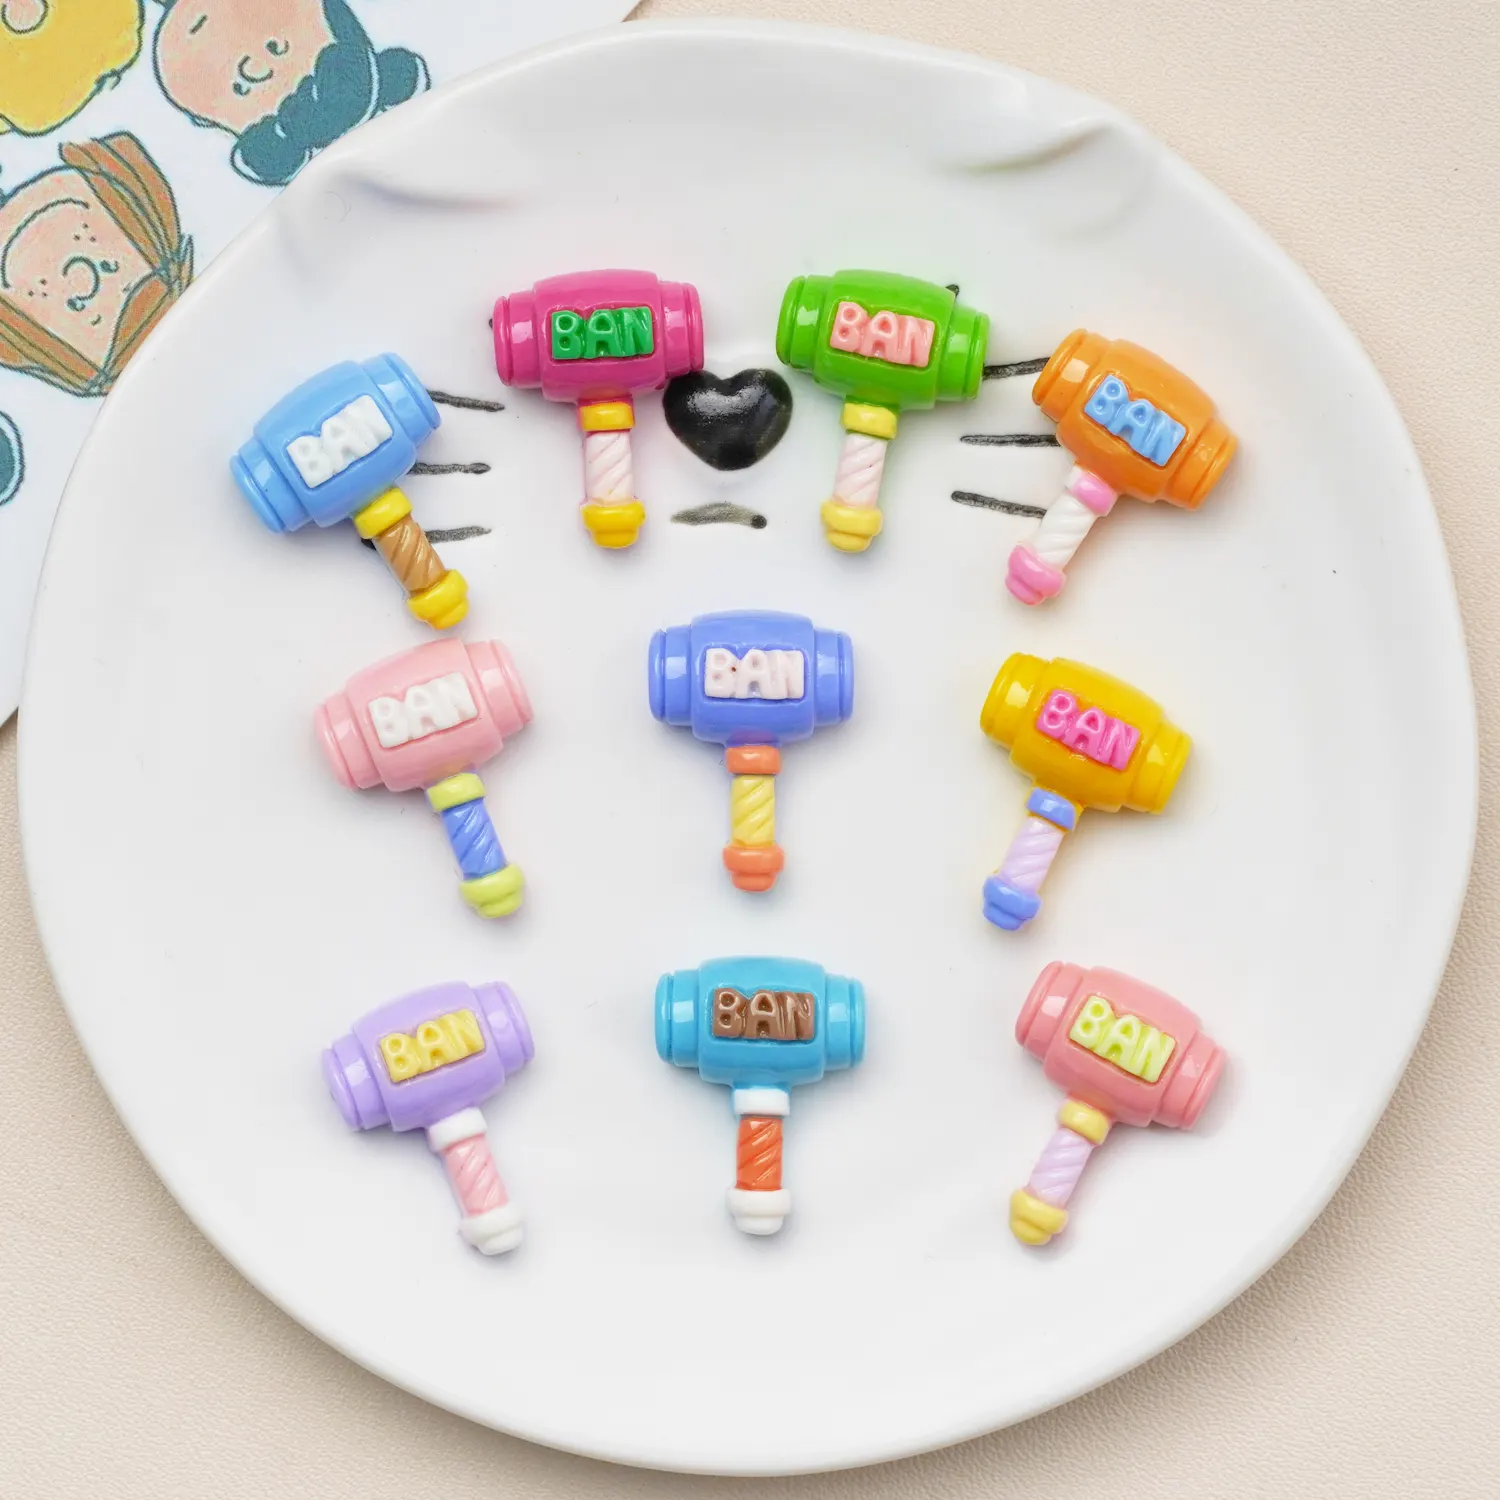 New style colorful small hammer resin art crafts for cell phone chain pendant hair clips DIY handmade home decoration materials